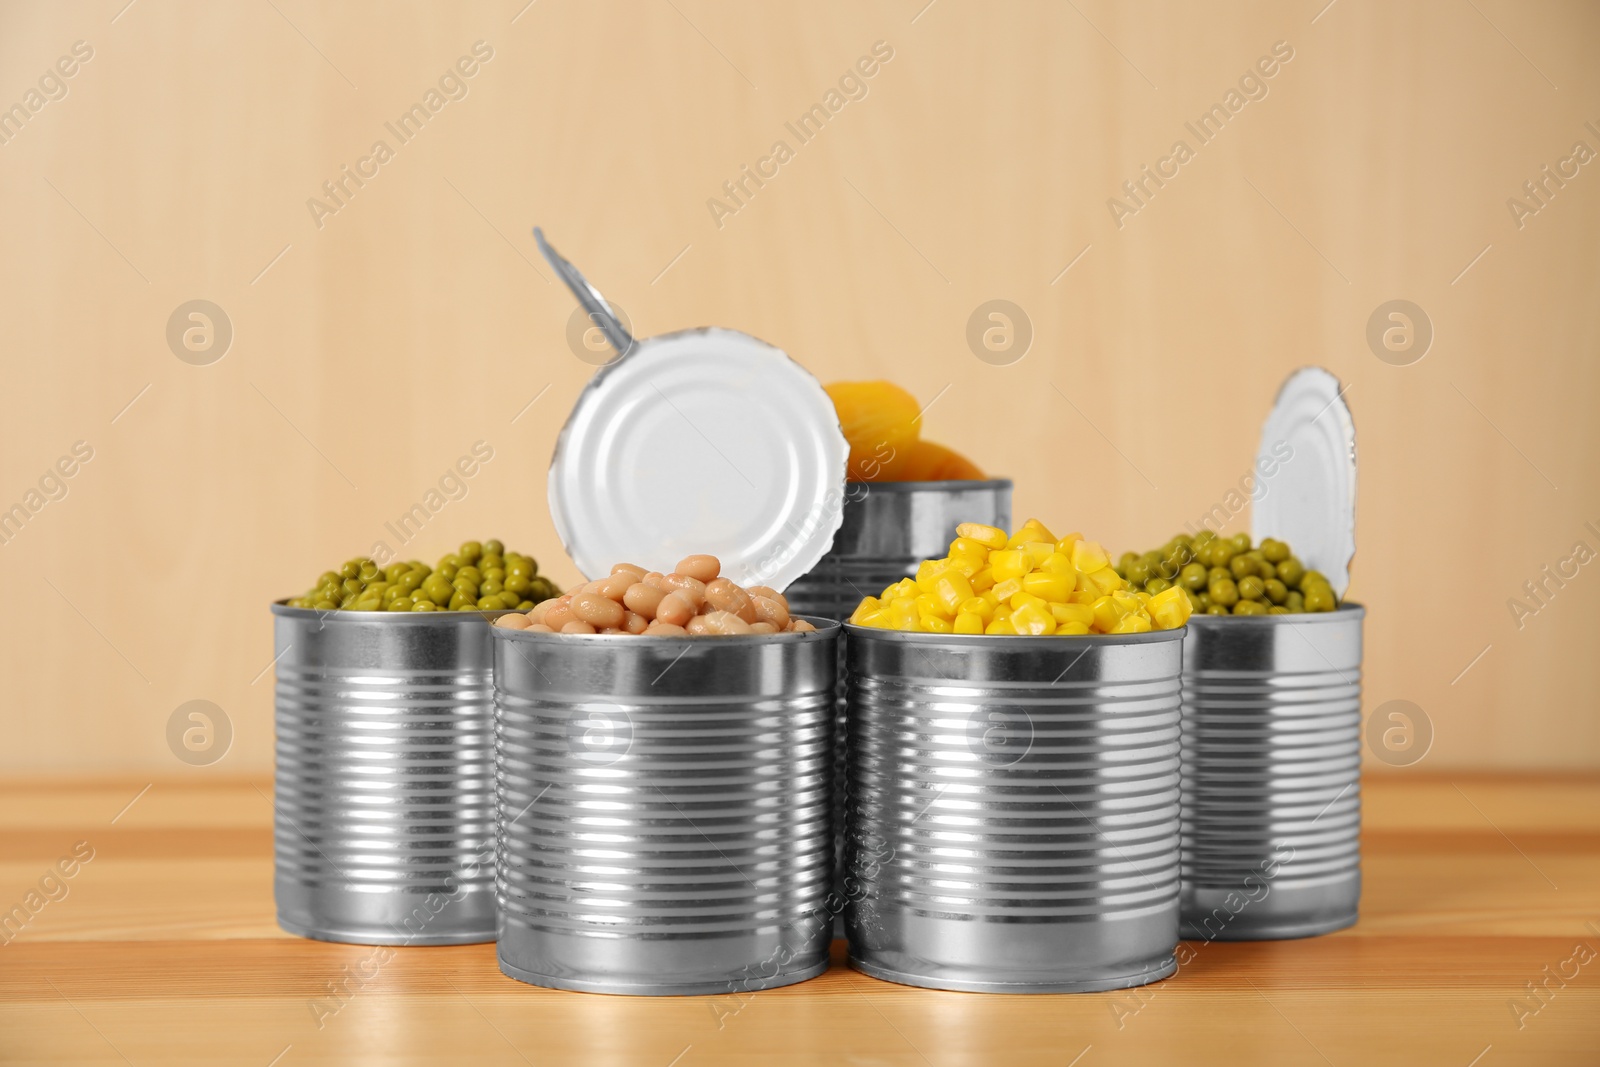 Photo of Open tin cans with conserved vegetables and fruits on wooden table